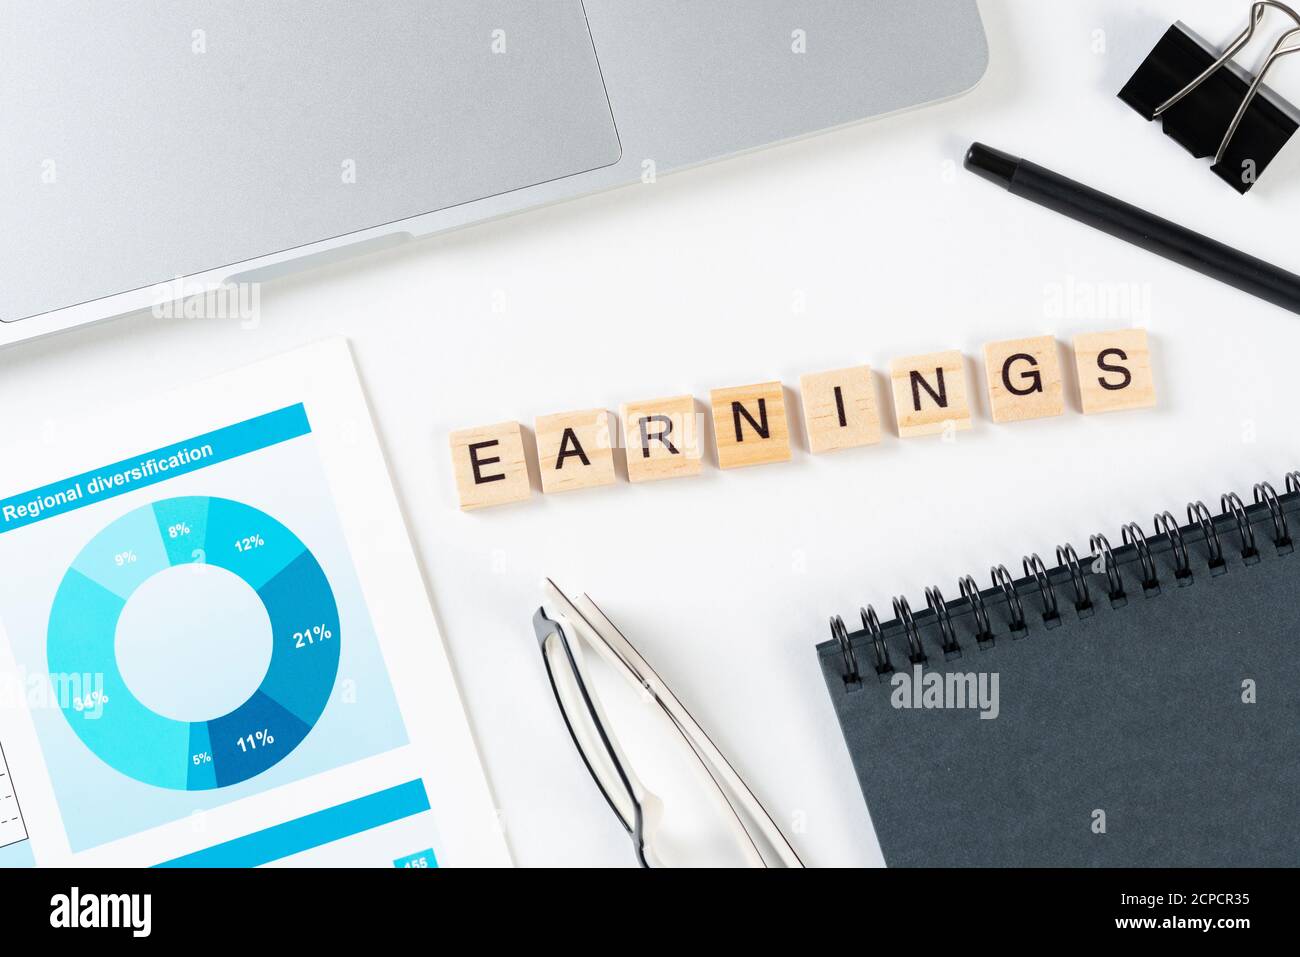 Earnings management concept with letters Stock Photo